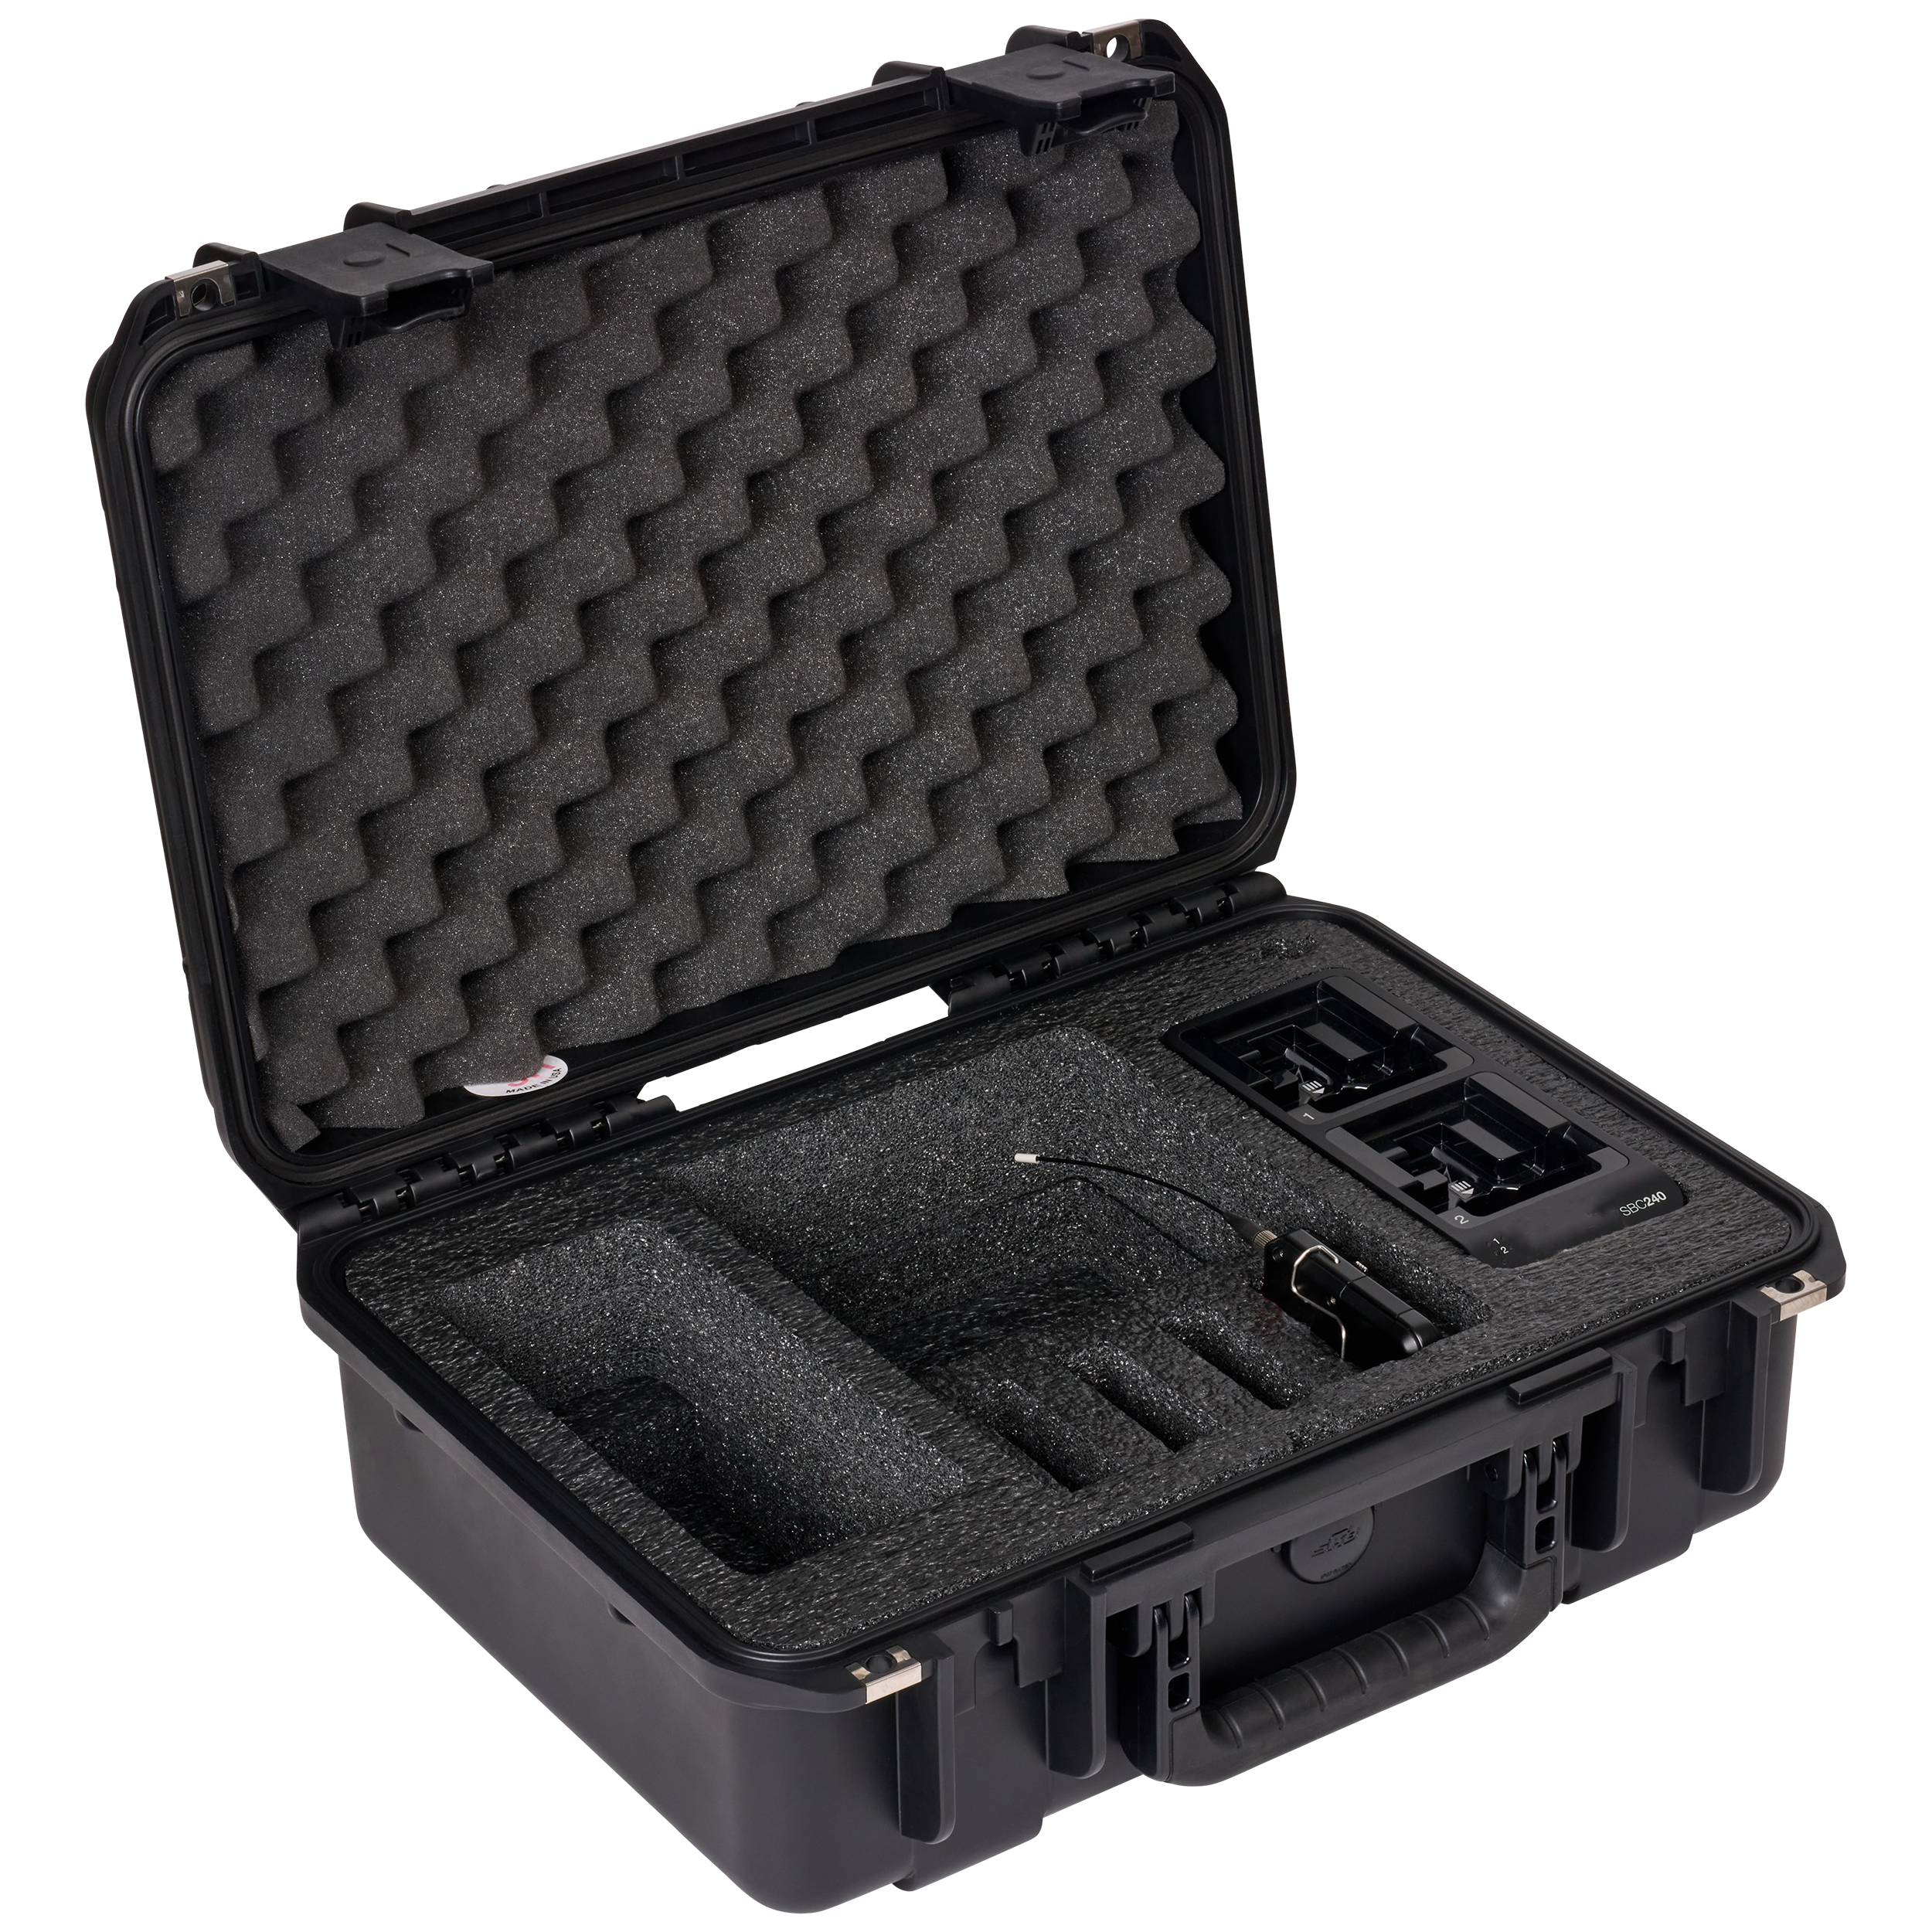 BYFP ipCase for 4x Shure Axient Digital Body Pack